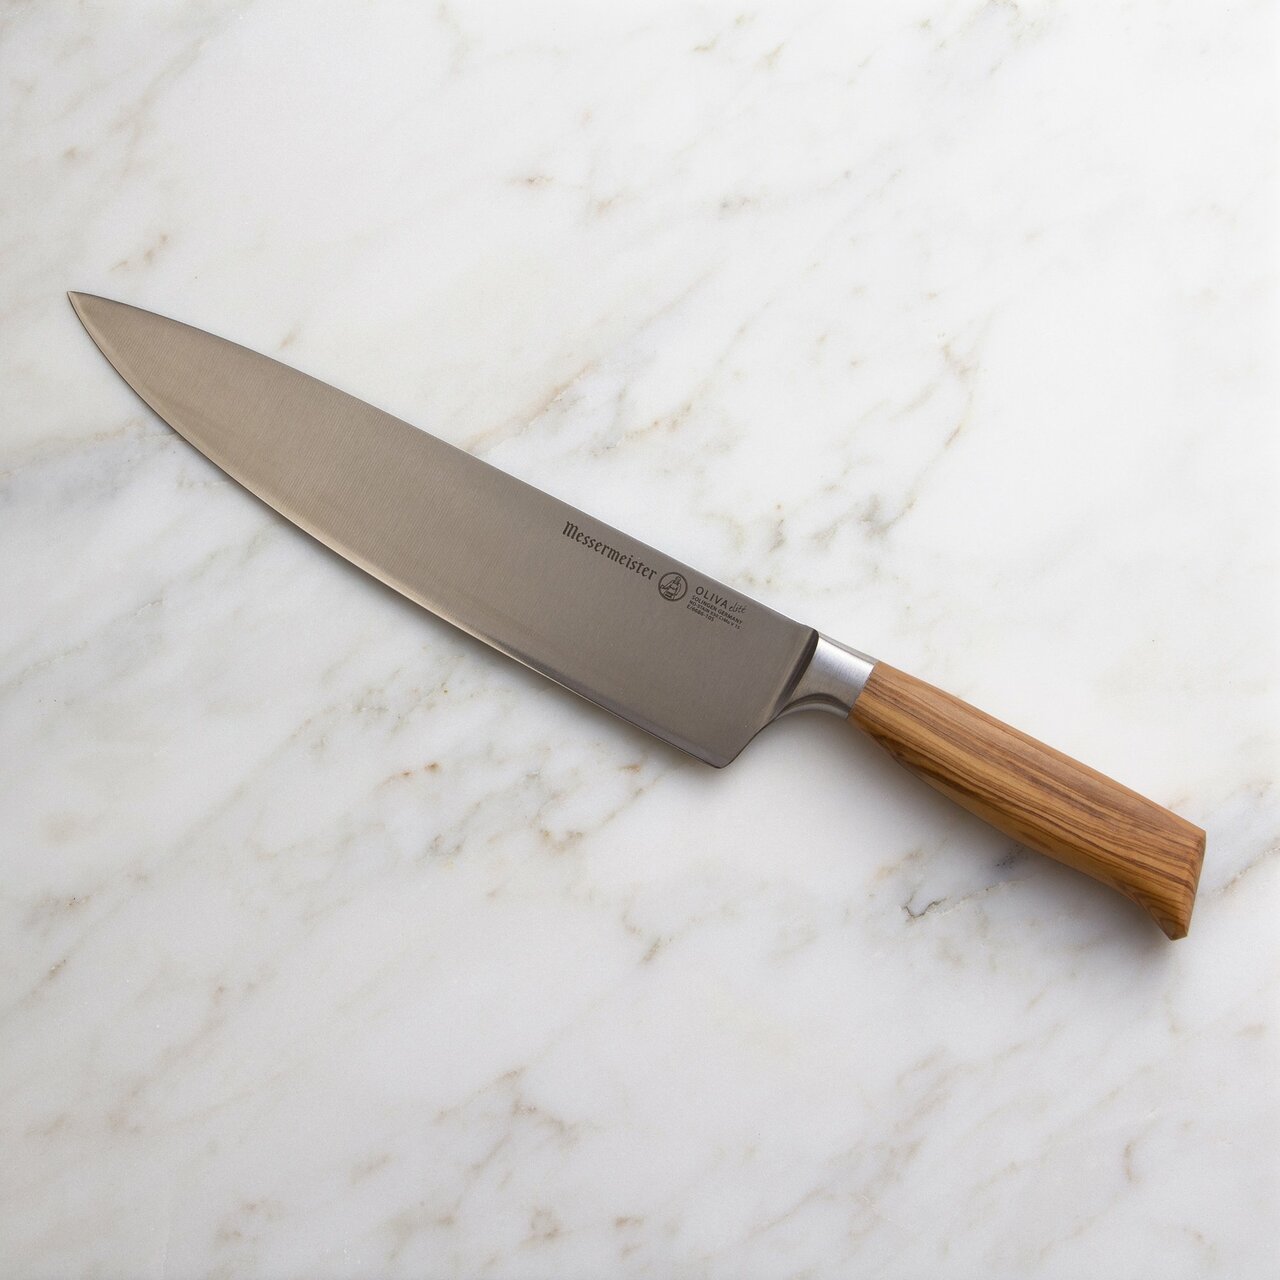 BEON.COM.AU E6686 10S       Oliva Elite Stealth Chef’s Knife The Messermeister Oliva Elite Stealth Chef’s Knife is the workhorse of all the knives. You will gravitate towards it when executing 90% of your culinary tasks. It has a highly figured Italian olive wood handle attached to a hand forged Stealth blad... Messermeister at BEON.COM.AU